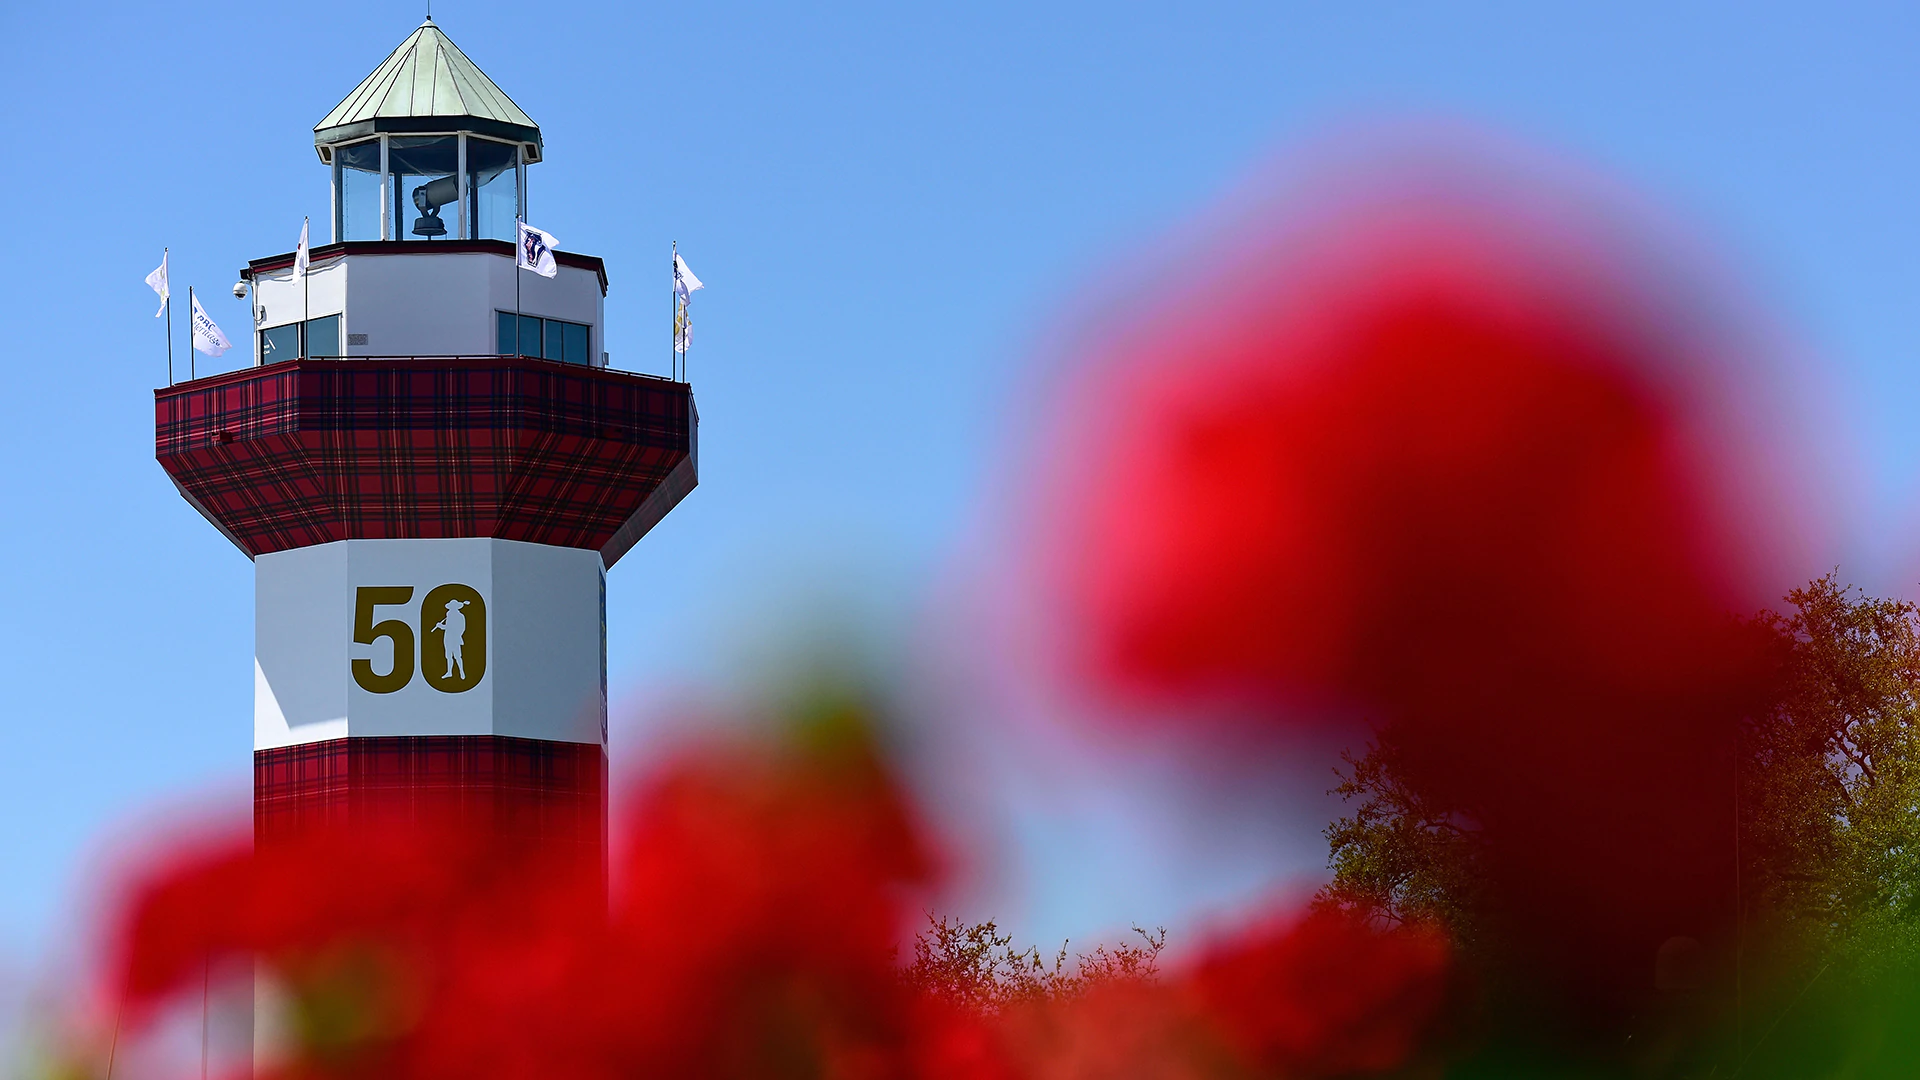 Sunday tee times pushed up at RBC Heritage